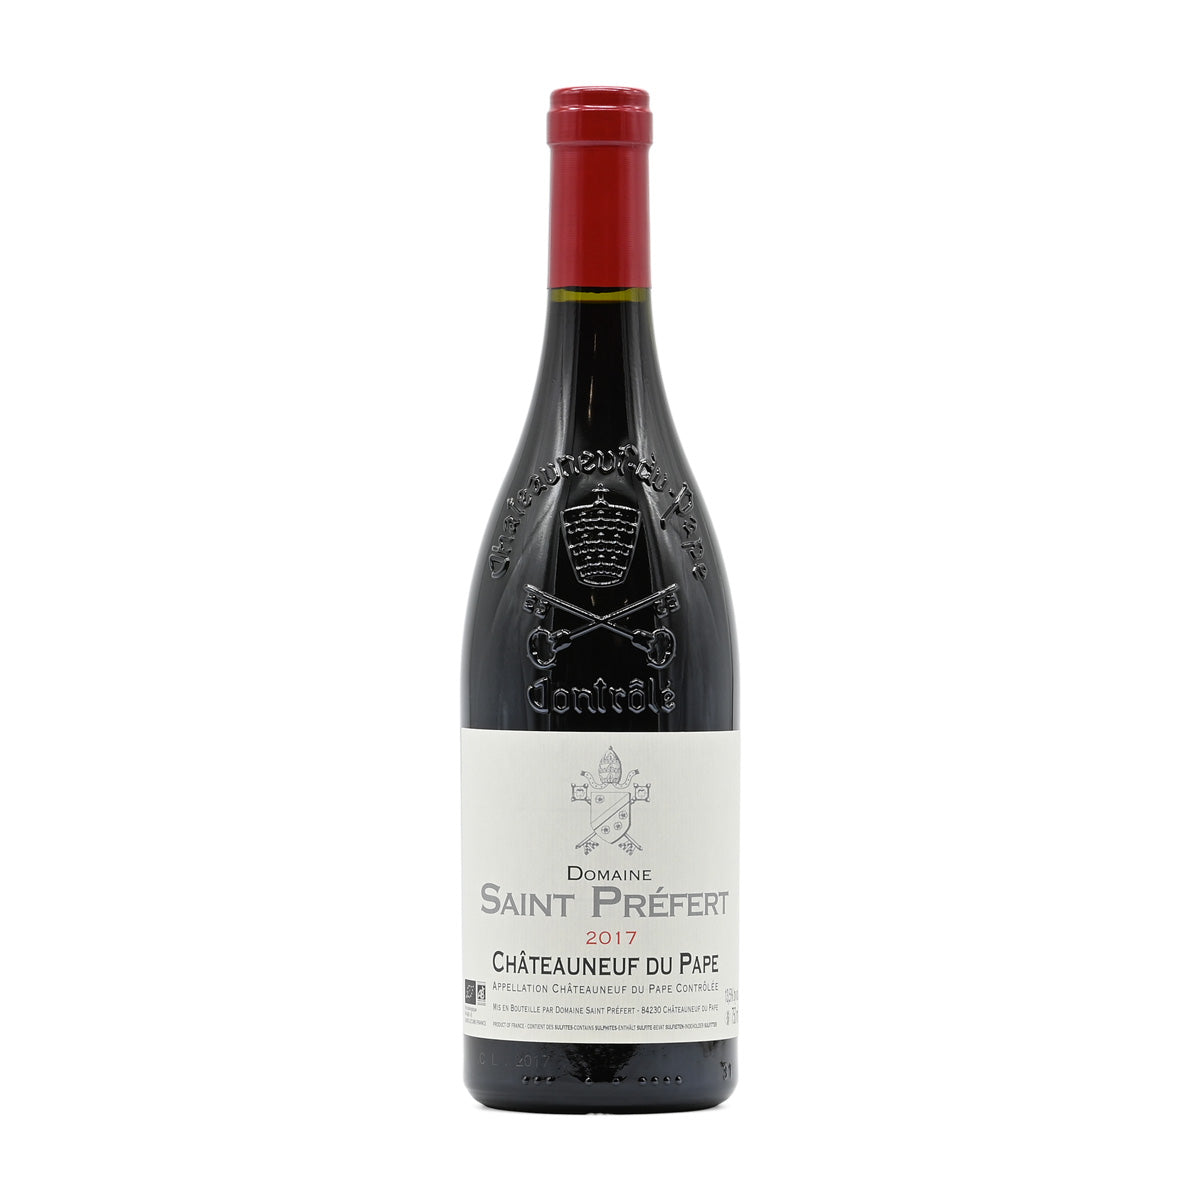 Domaine Saint Prefert Chateauneuf-du-Pape rouge Classique 2017, 750ml French red wine, made a blend of Grenache, Mourvèdre, Syrah, Cinsault, and white grape varieties, from Southern Rhone, France – GDV Fine Wines, Hong Kong